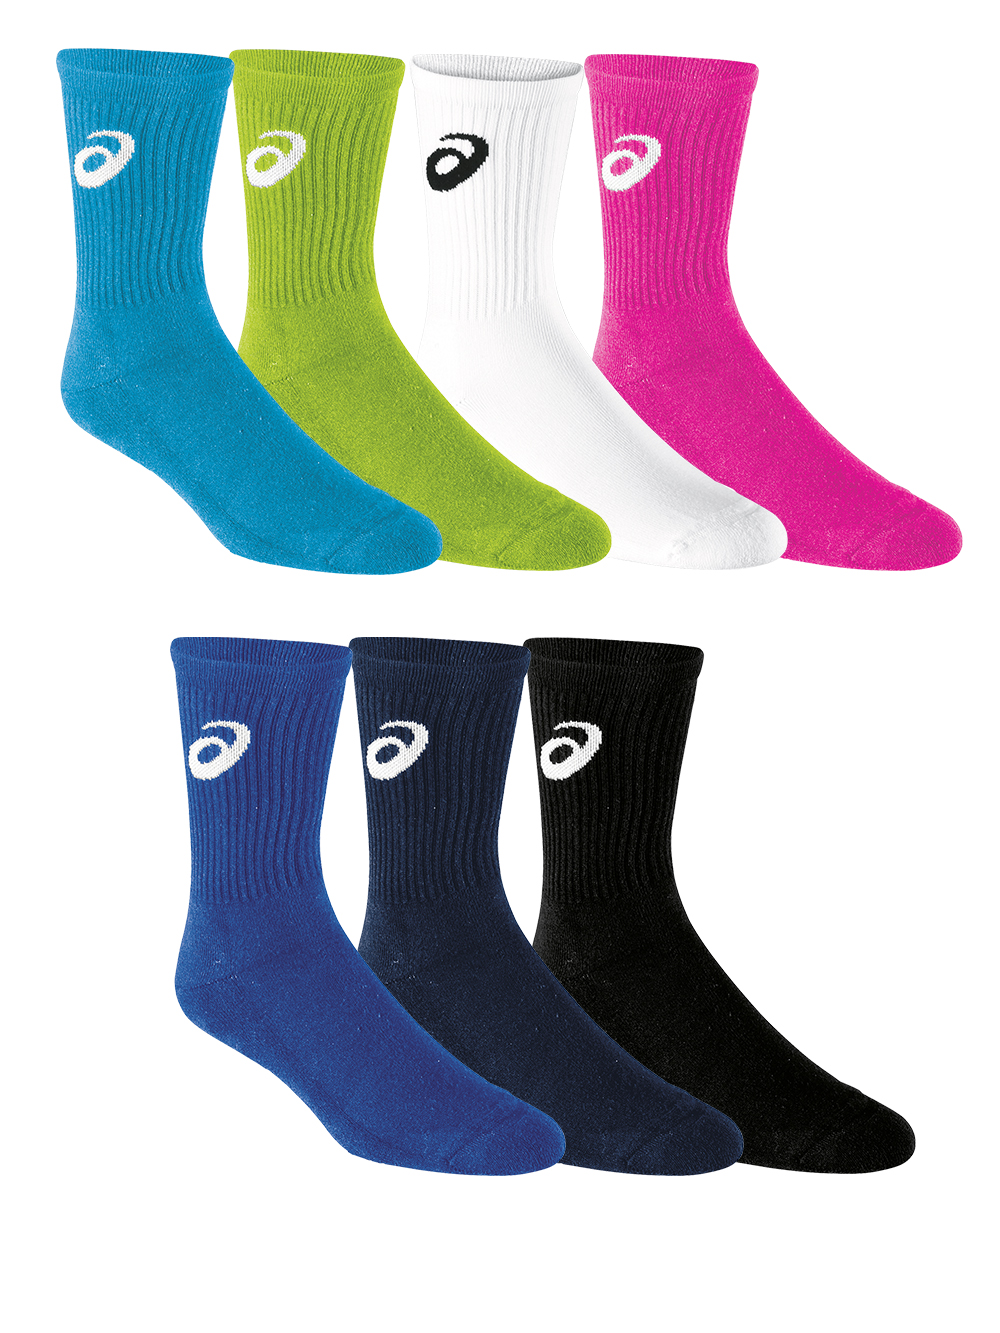 Asics Crew Socks | Midwest Volleyball 